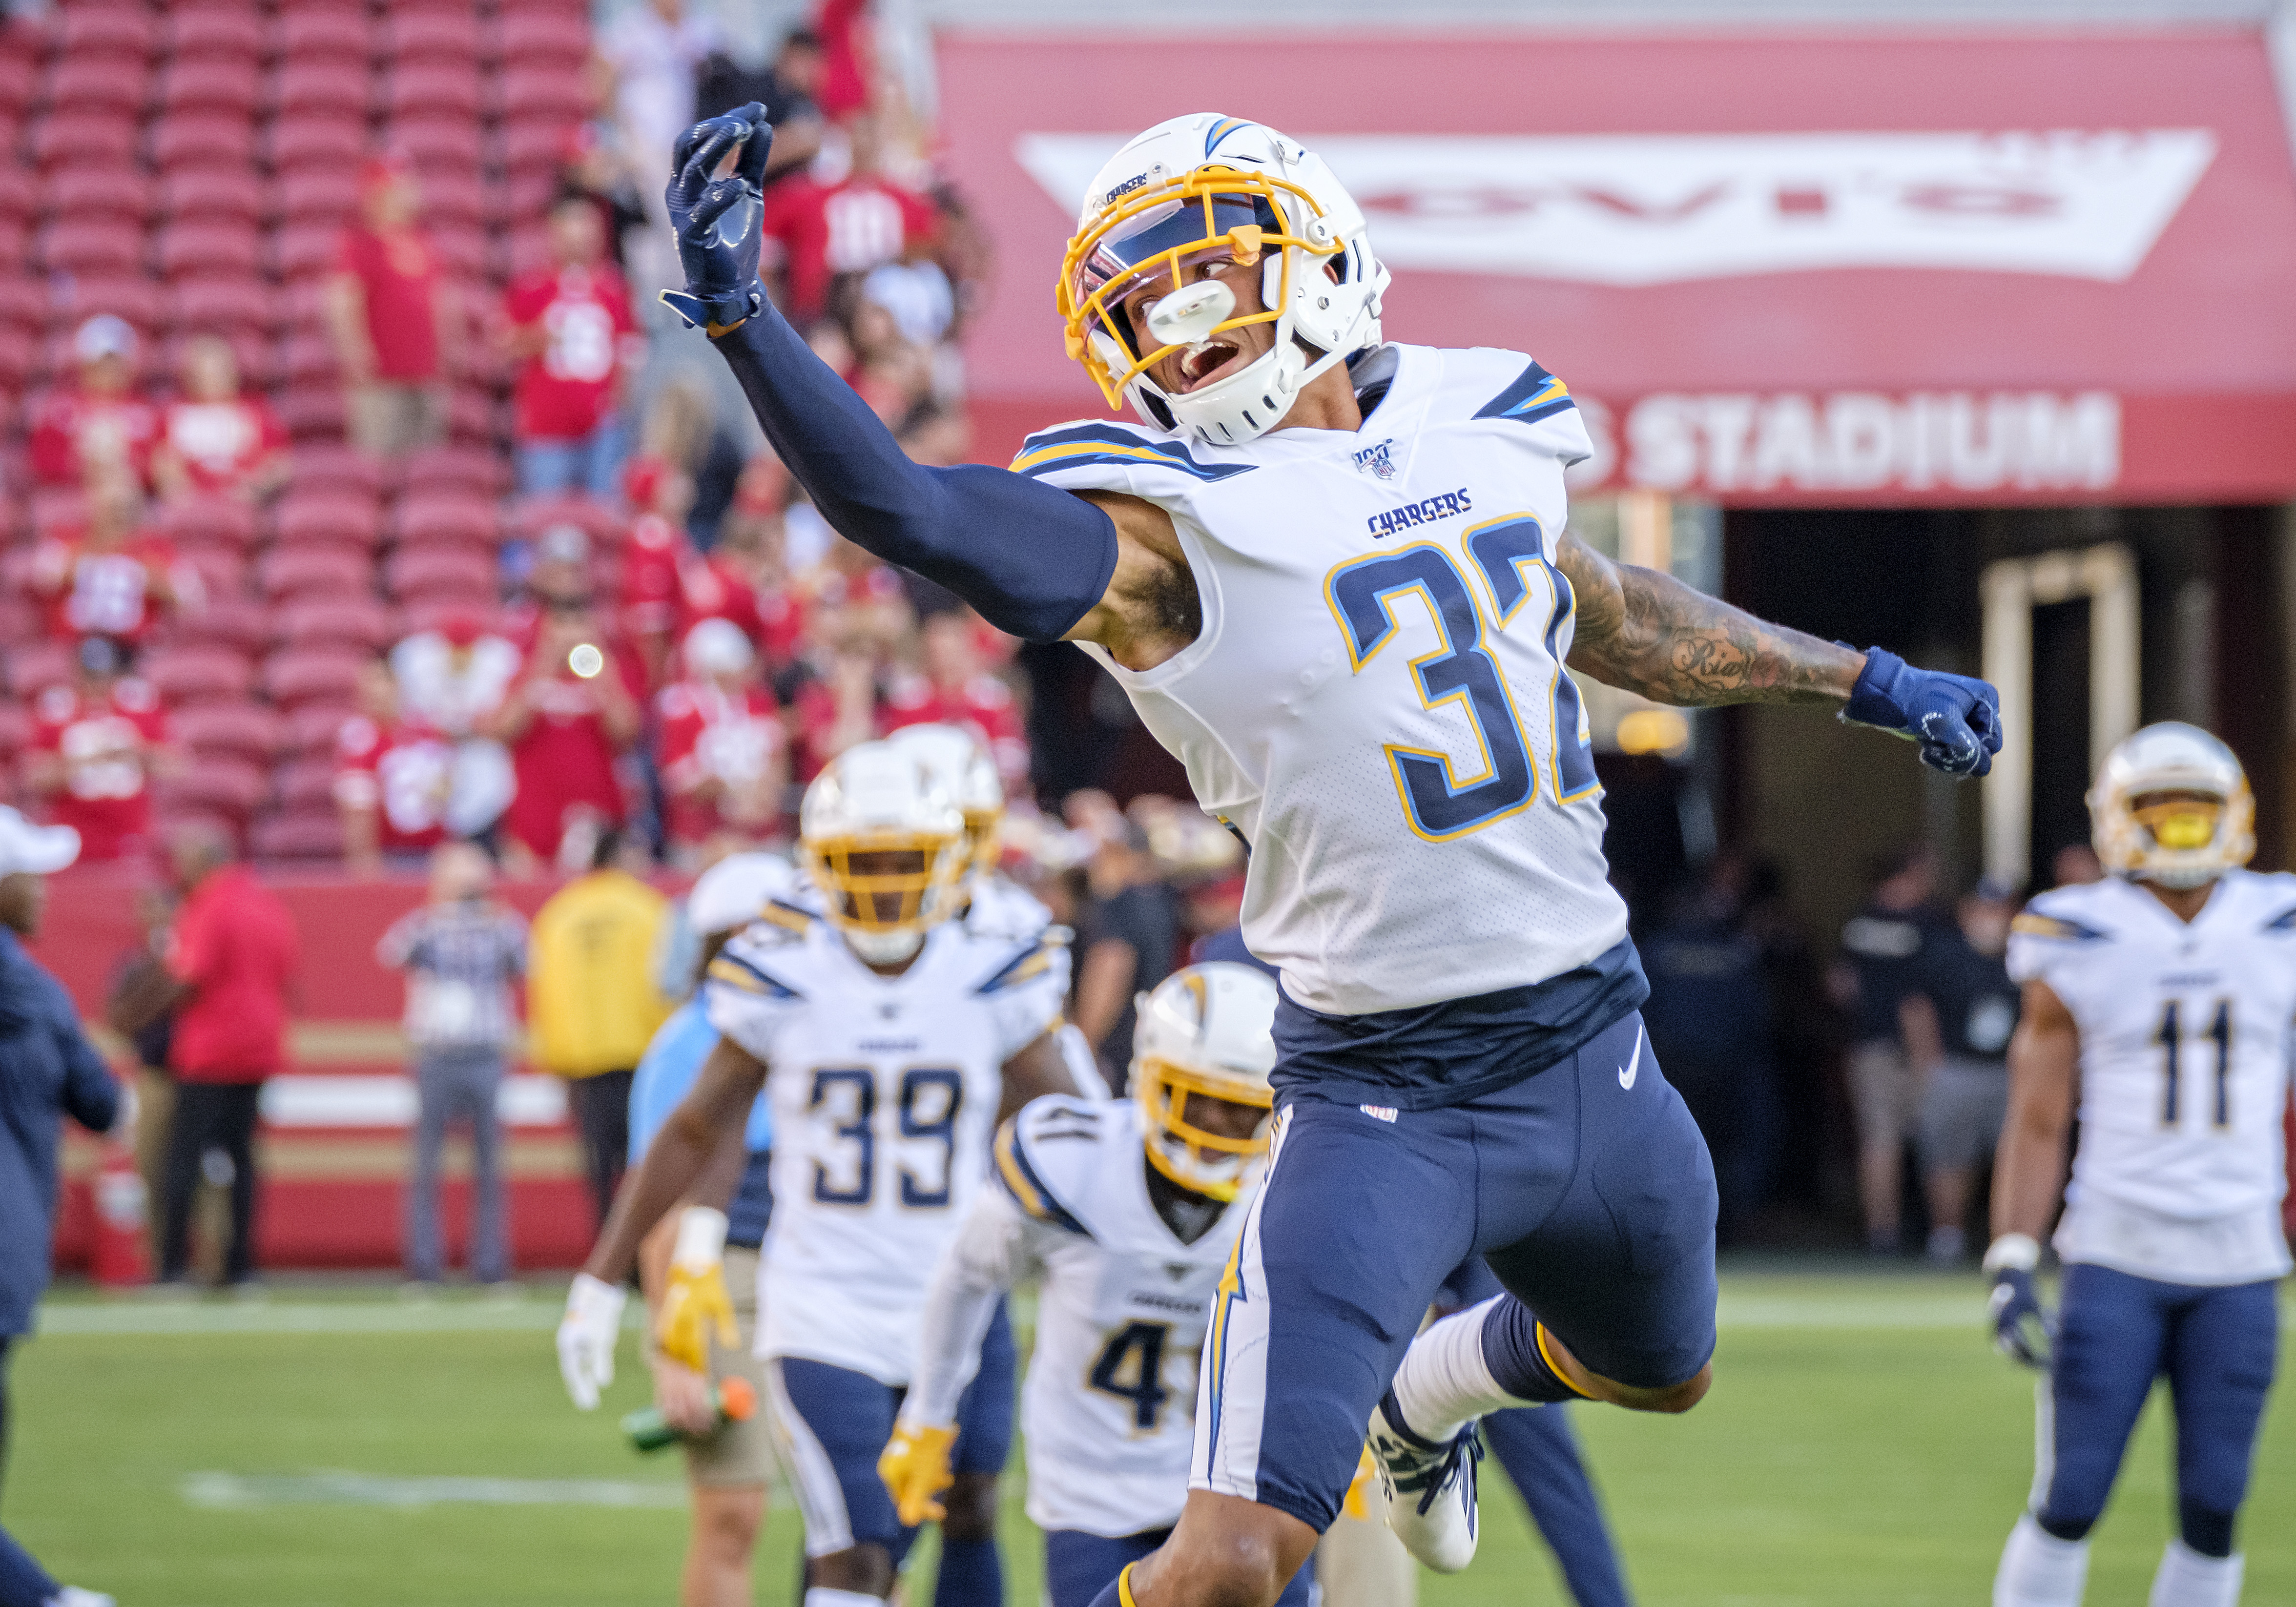 NFL: AUG 29 Preseason - Chargers at 49ers